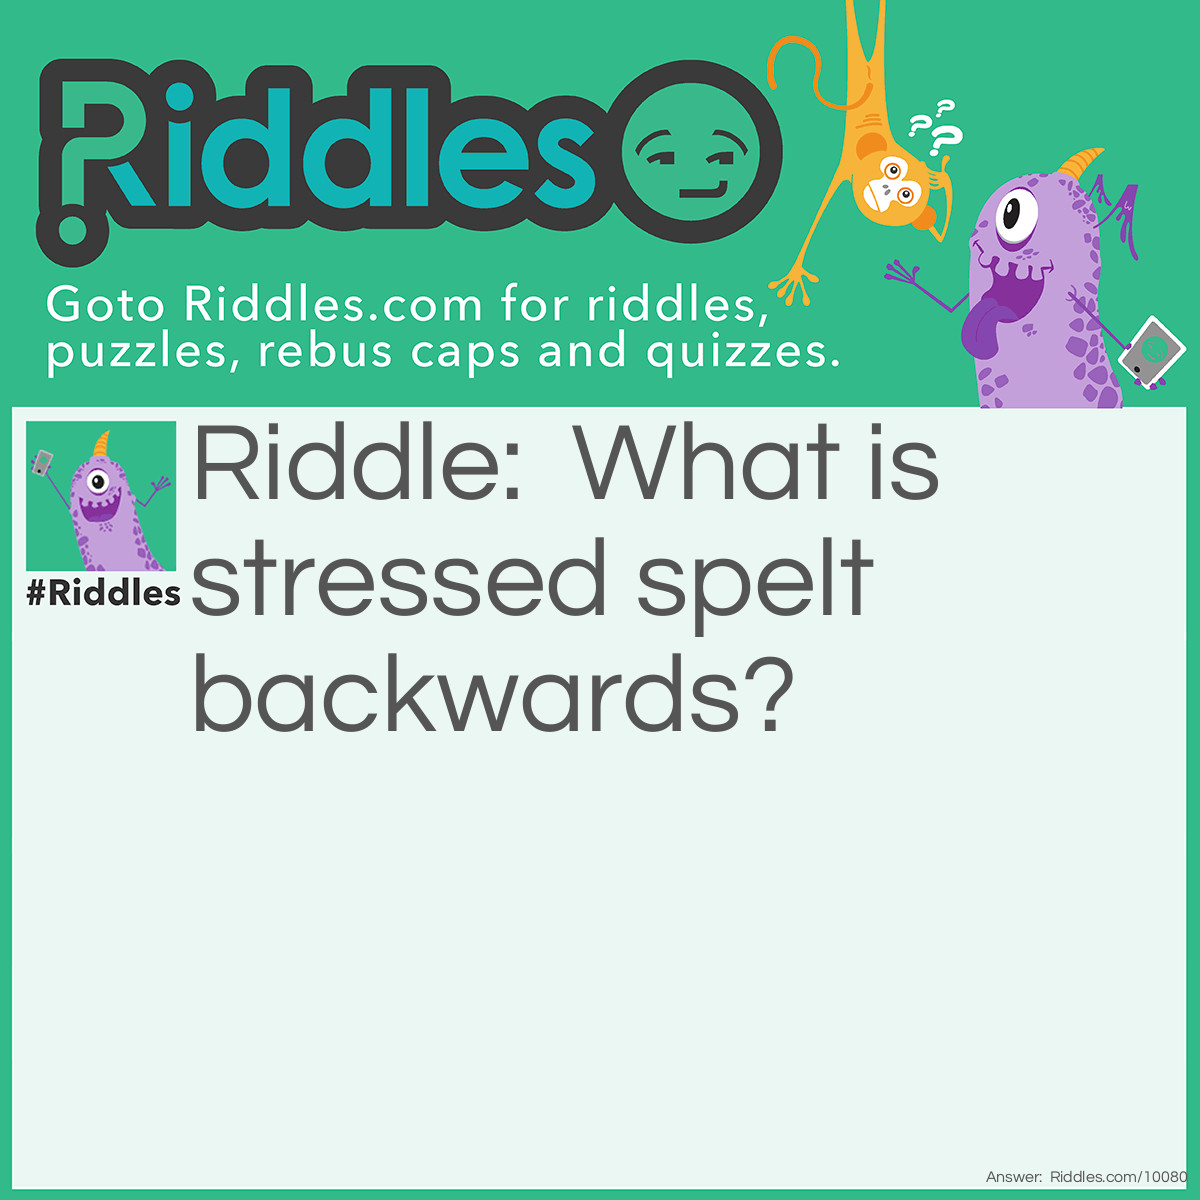 Riddle: What is stressed spelt backwards? Answer: Desserts. Like ice-cream.